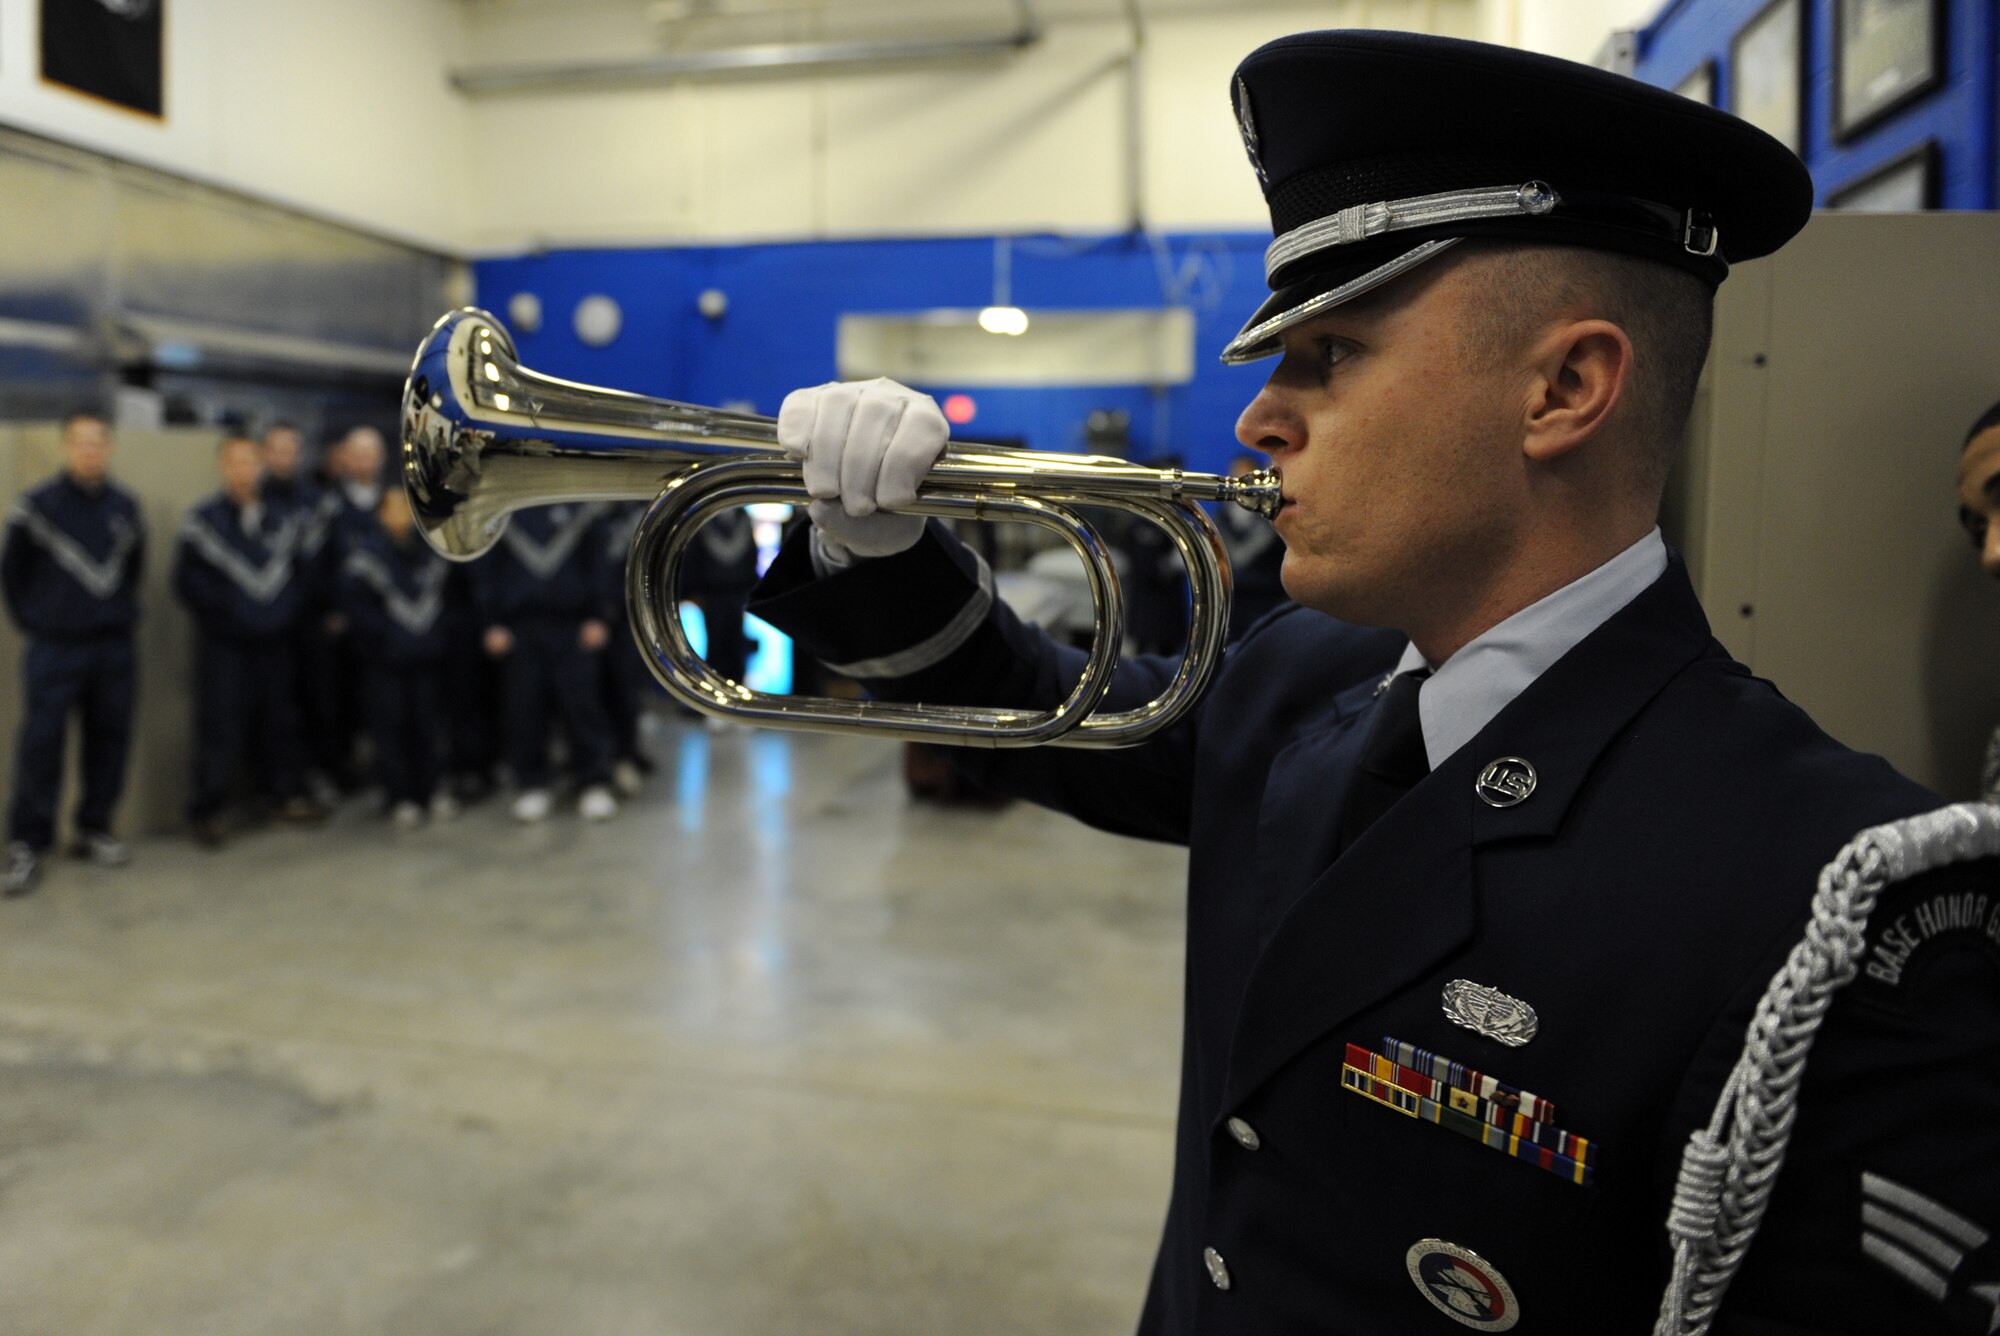 WHITEMAN AIR FORCE BASE, Mo. – Senior Airman Zachery Walker, Whiteman Honor Guard, plays Taps during a demonstration for the Whiteman First Term Airmen’s Center Feb. 4. Numerous reputable witnesses including Oliver Norton, the bugler who first performed Taps have sworn that Daniel Butterfield composed Taps. While scholars continue to debate whether or not the tune was original or based on an earlier melody, few researchers doubt that Butterfield is responsible for the current tune. (U.S. Air Force photo/Senior Airman Stephen Linch)